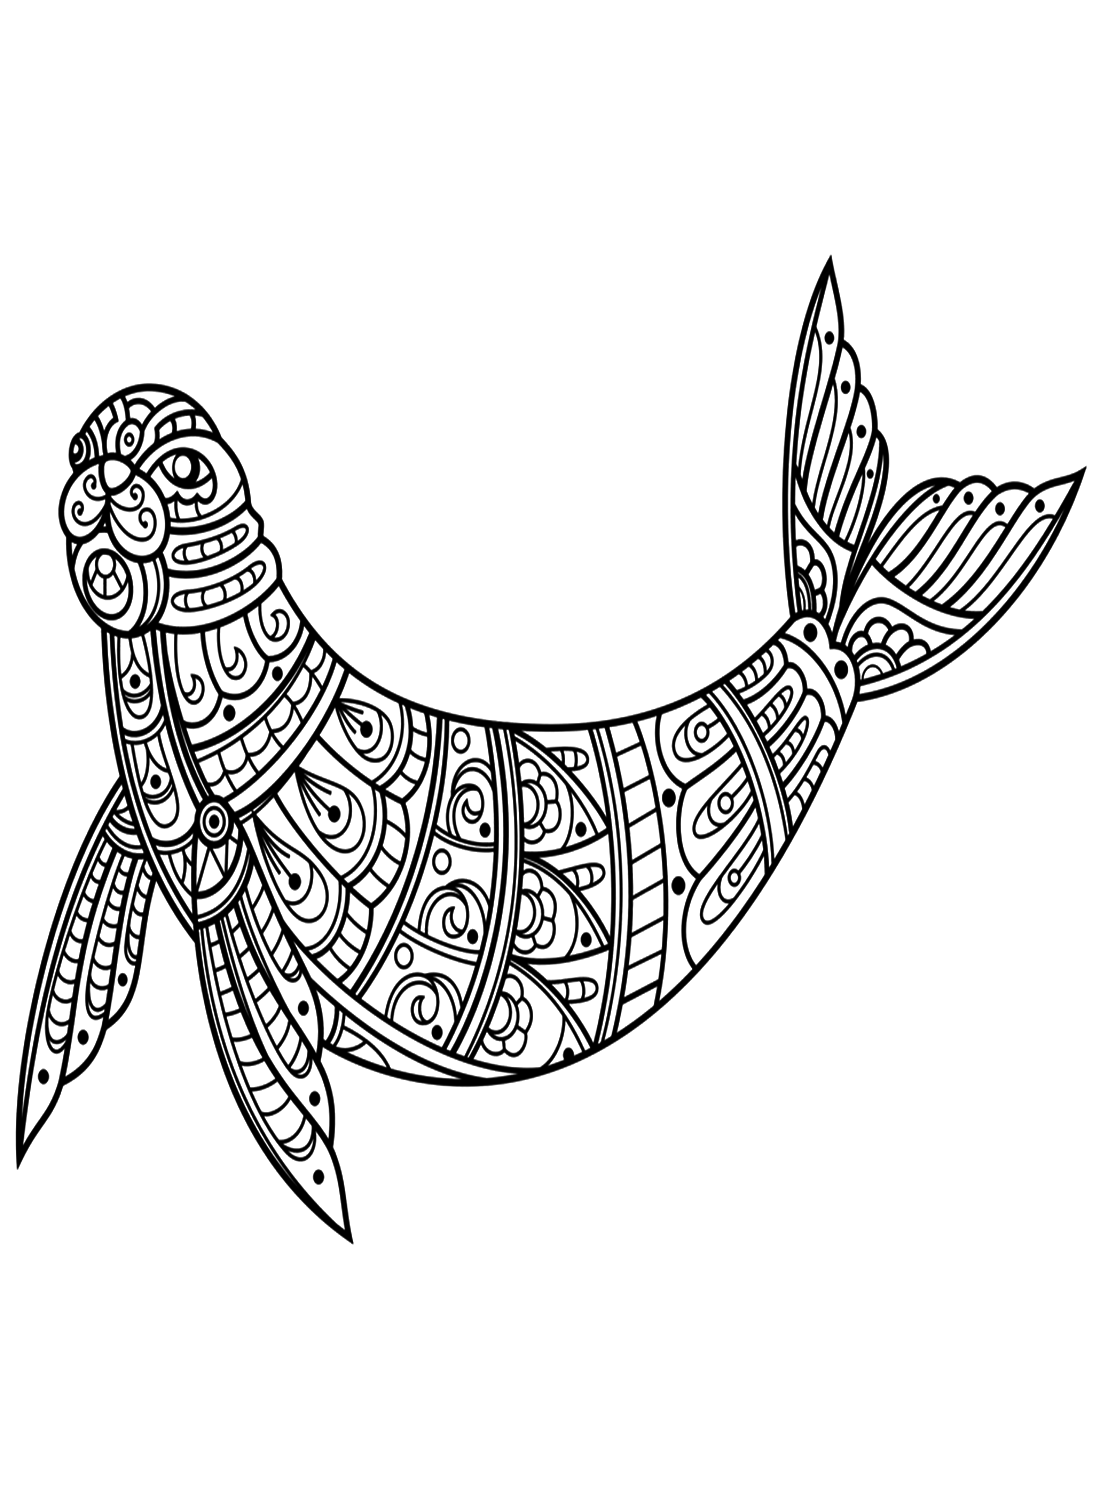 Seal In Zentangle Style from Zentangle Animal